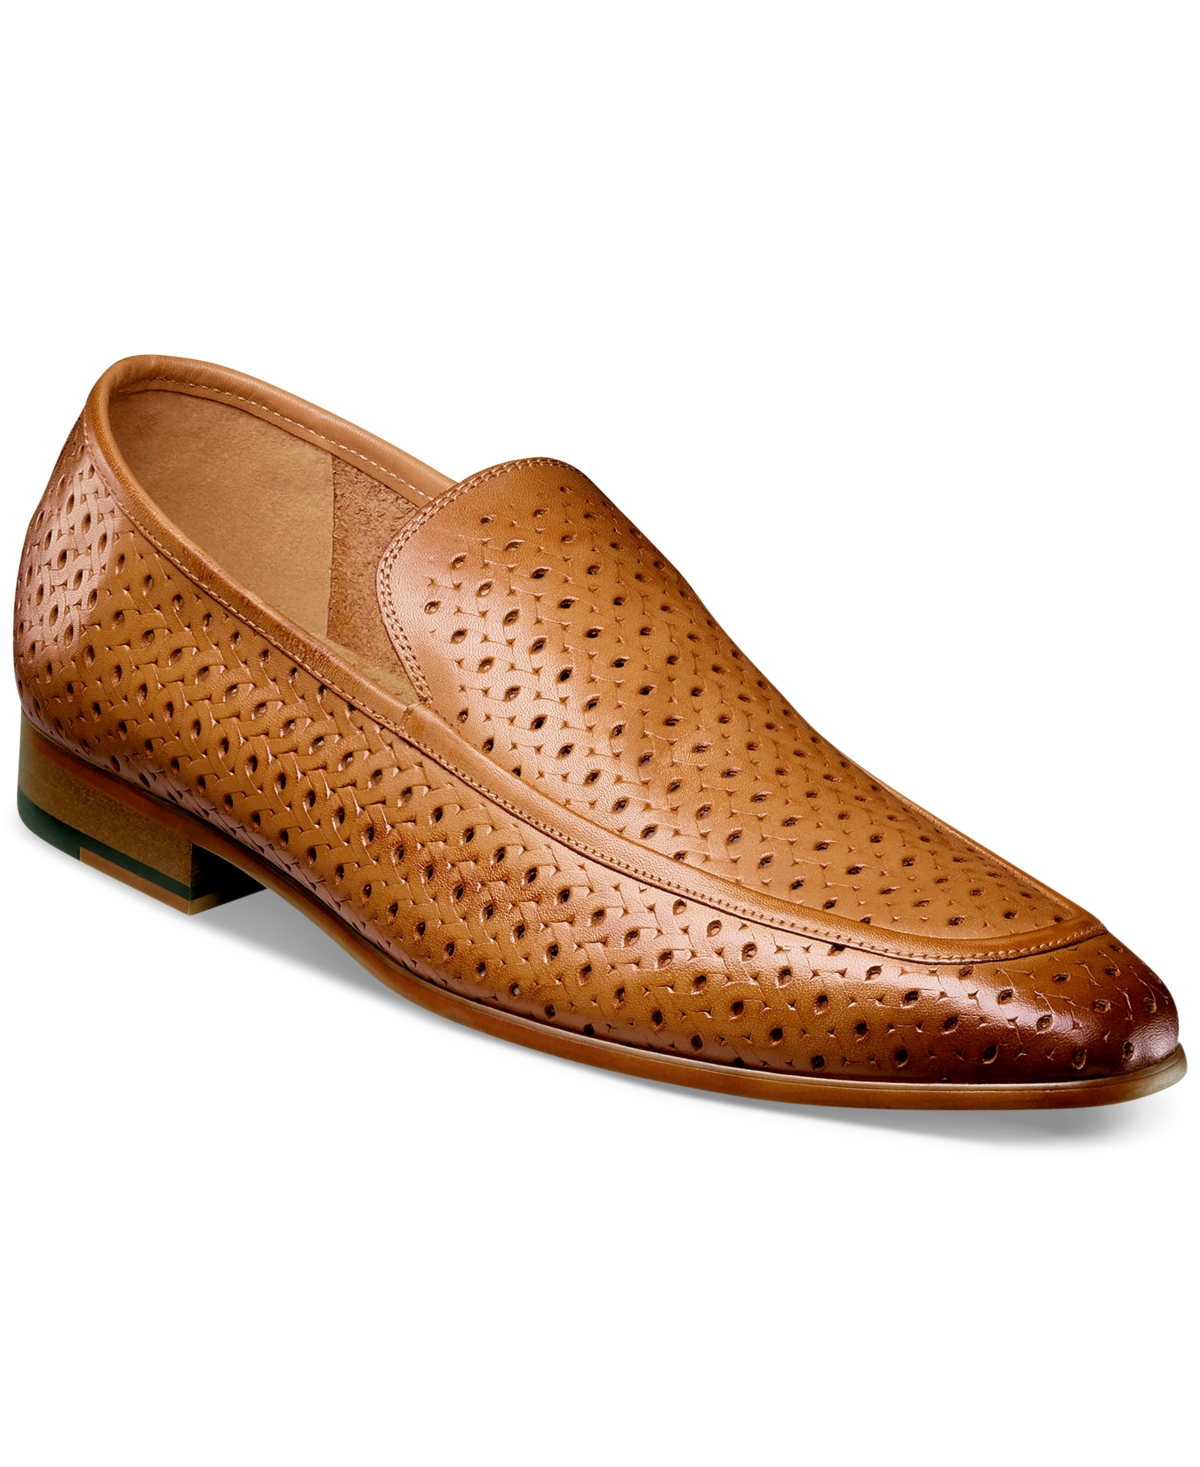 Stacy Adams Men's Winden Perforated Slip-on Loafers In Burgundy